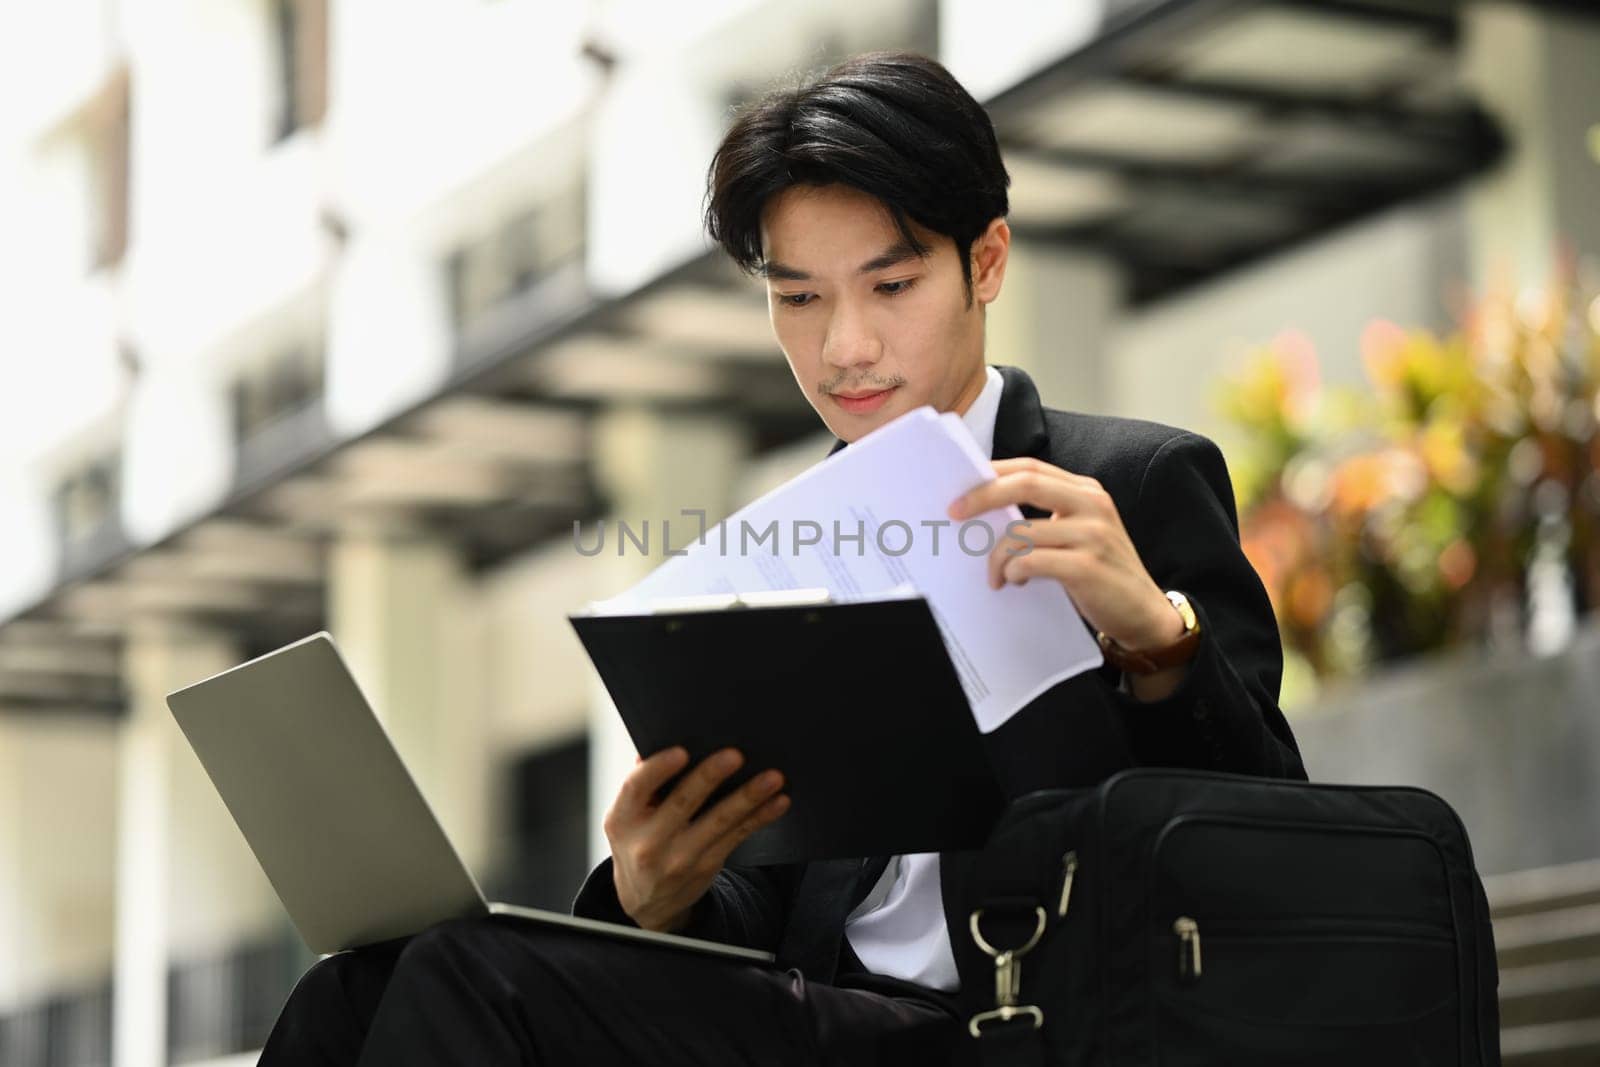 Focused businessman examining reports before going to the office. Business, technology and lifestyle by prathanchorruangsak